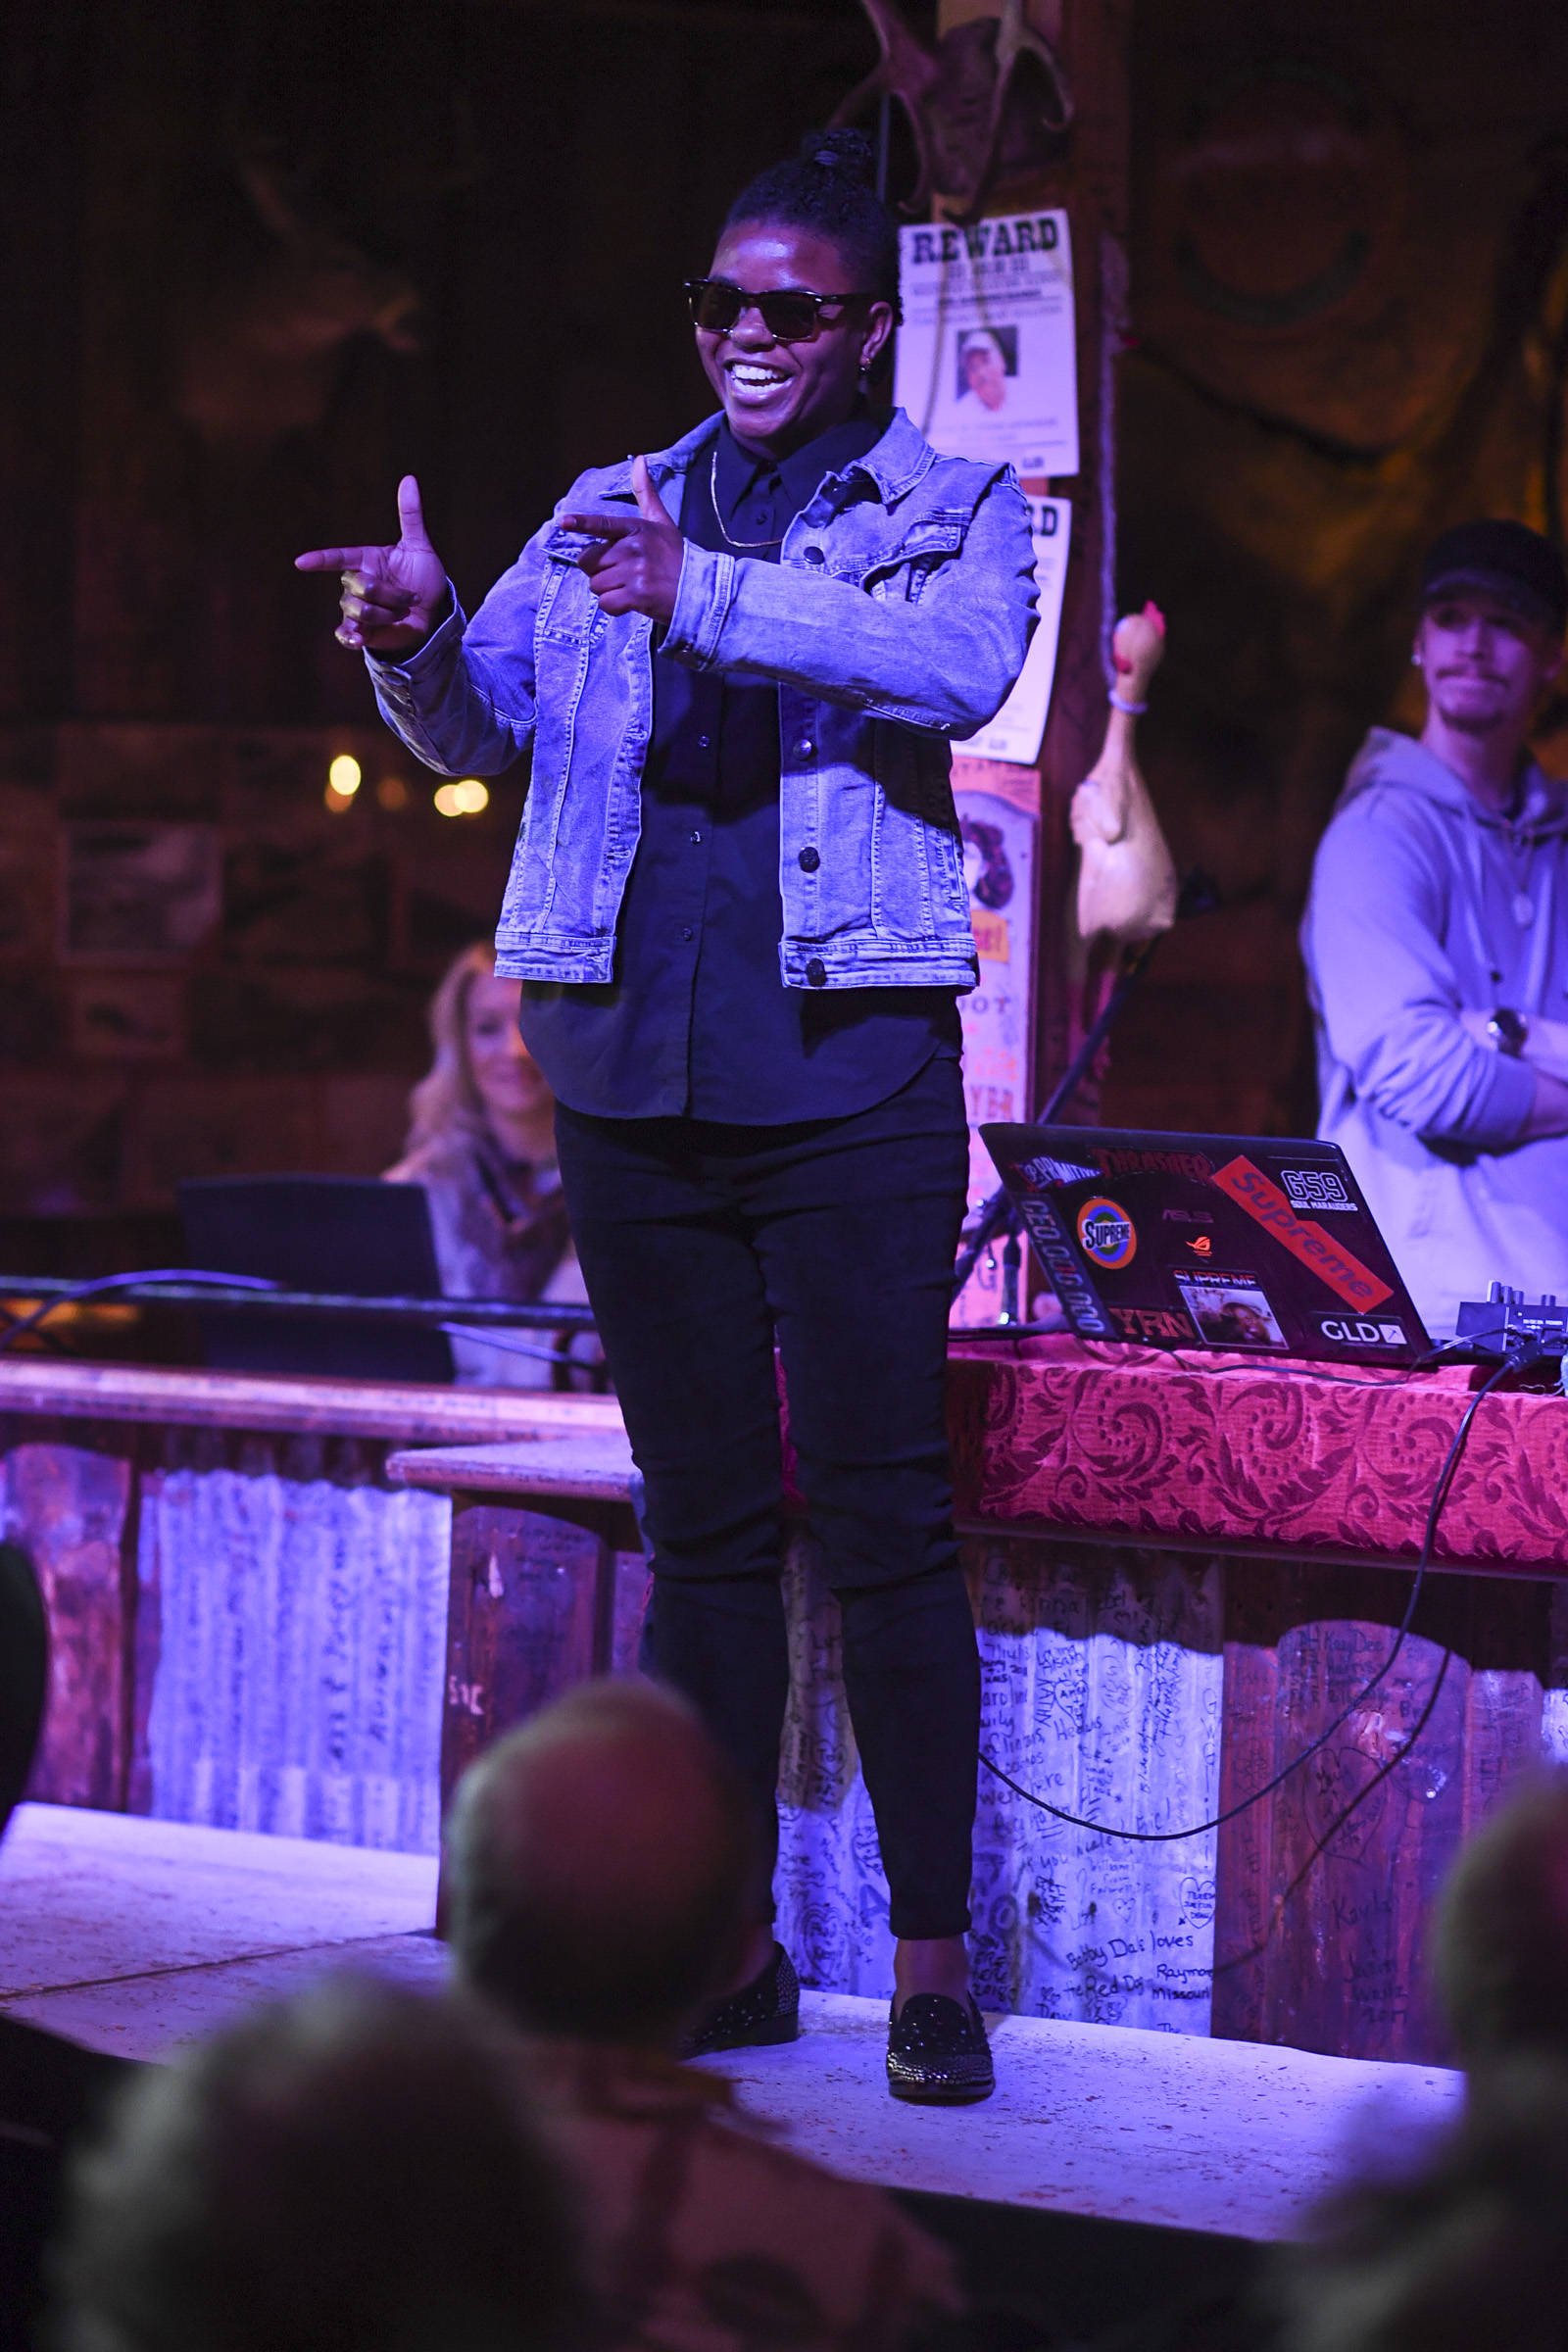 Women’s clothing and shoes from Shoefly is modeled on stage during the Juneau Rotaract’s Wild West Roundup Fashion Show at the Red Dog Saloon on Saturday, April 27, 2019. (Michael Penn | Juneau Empire)